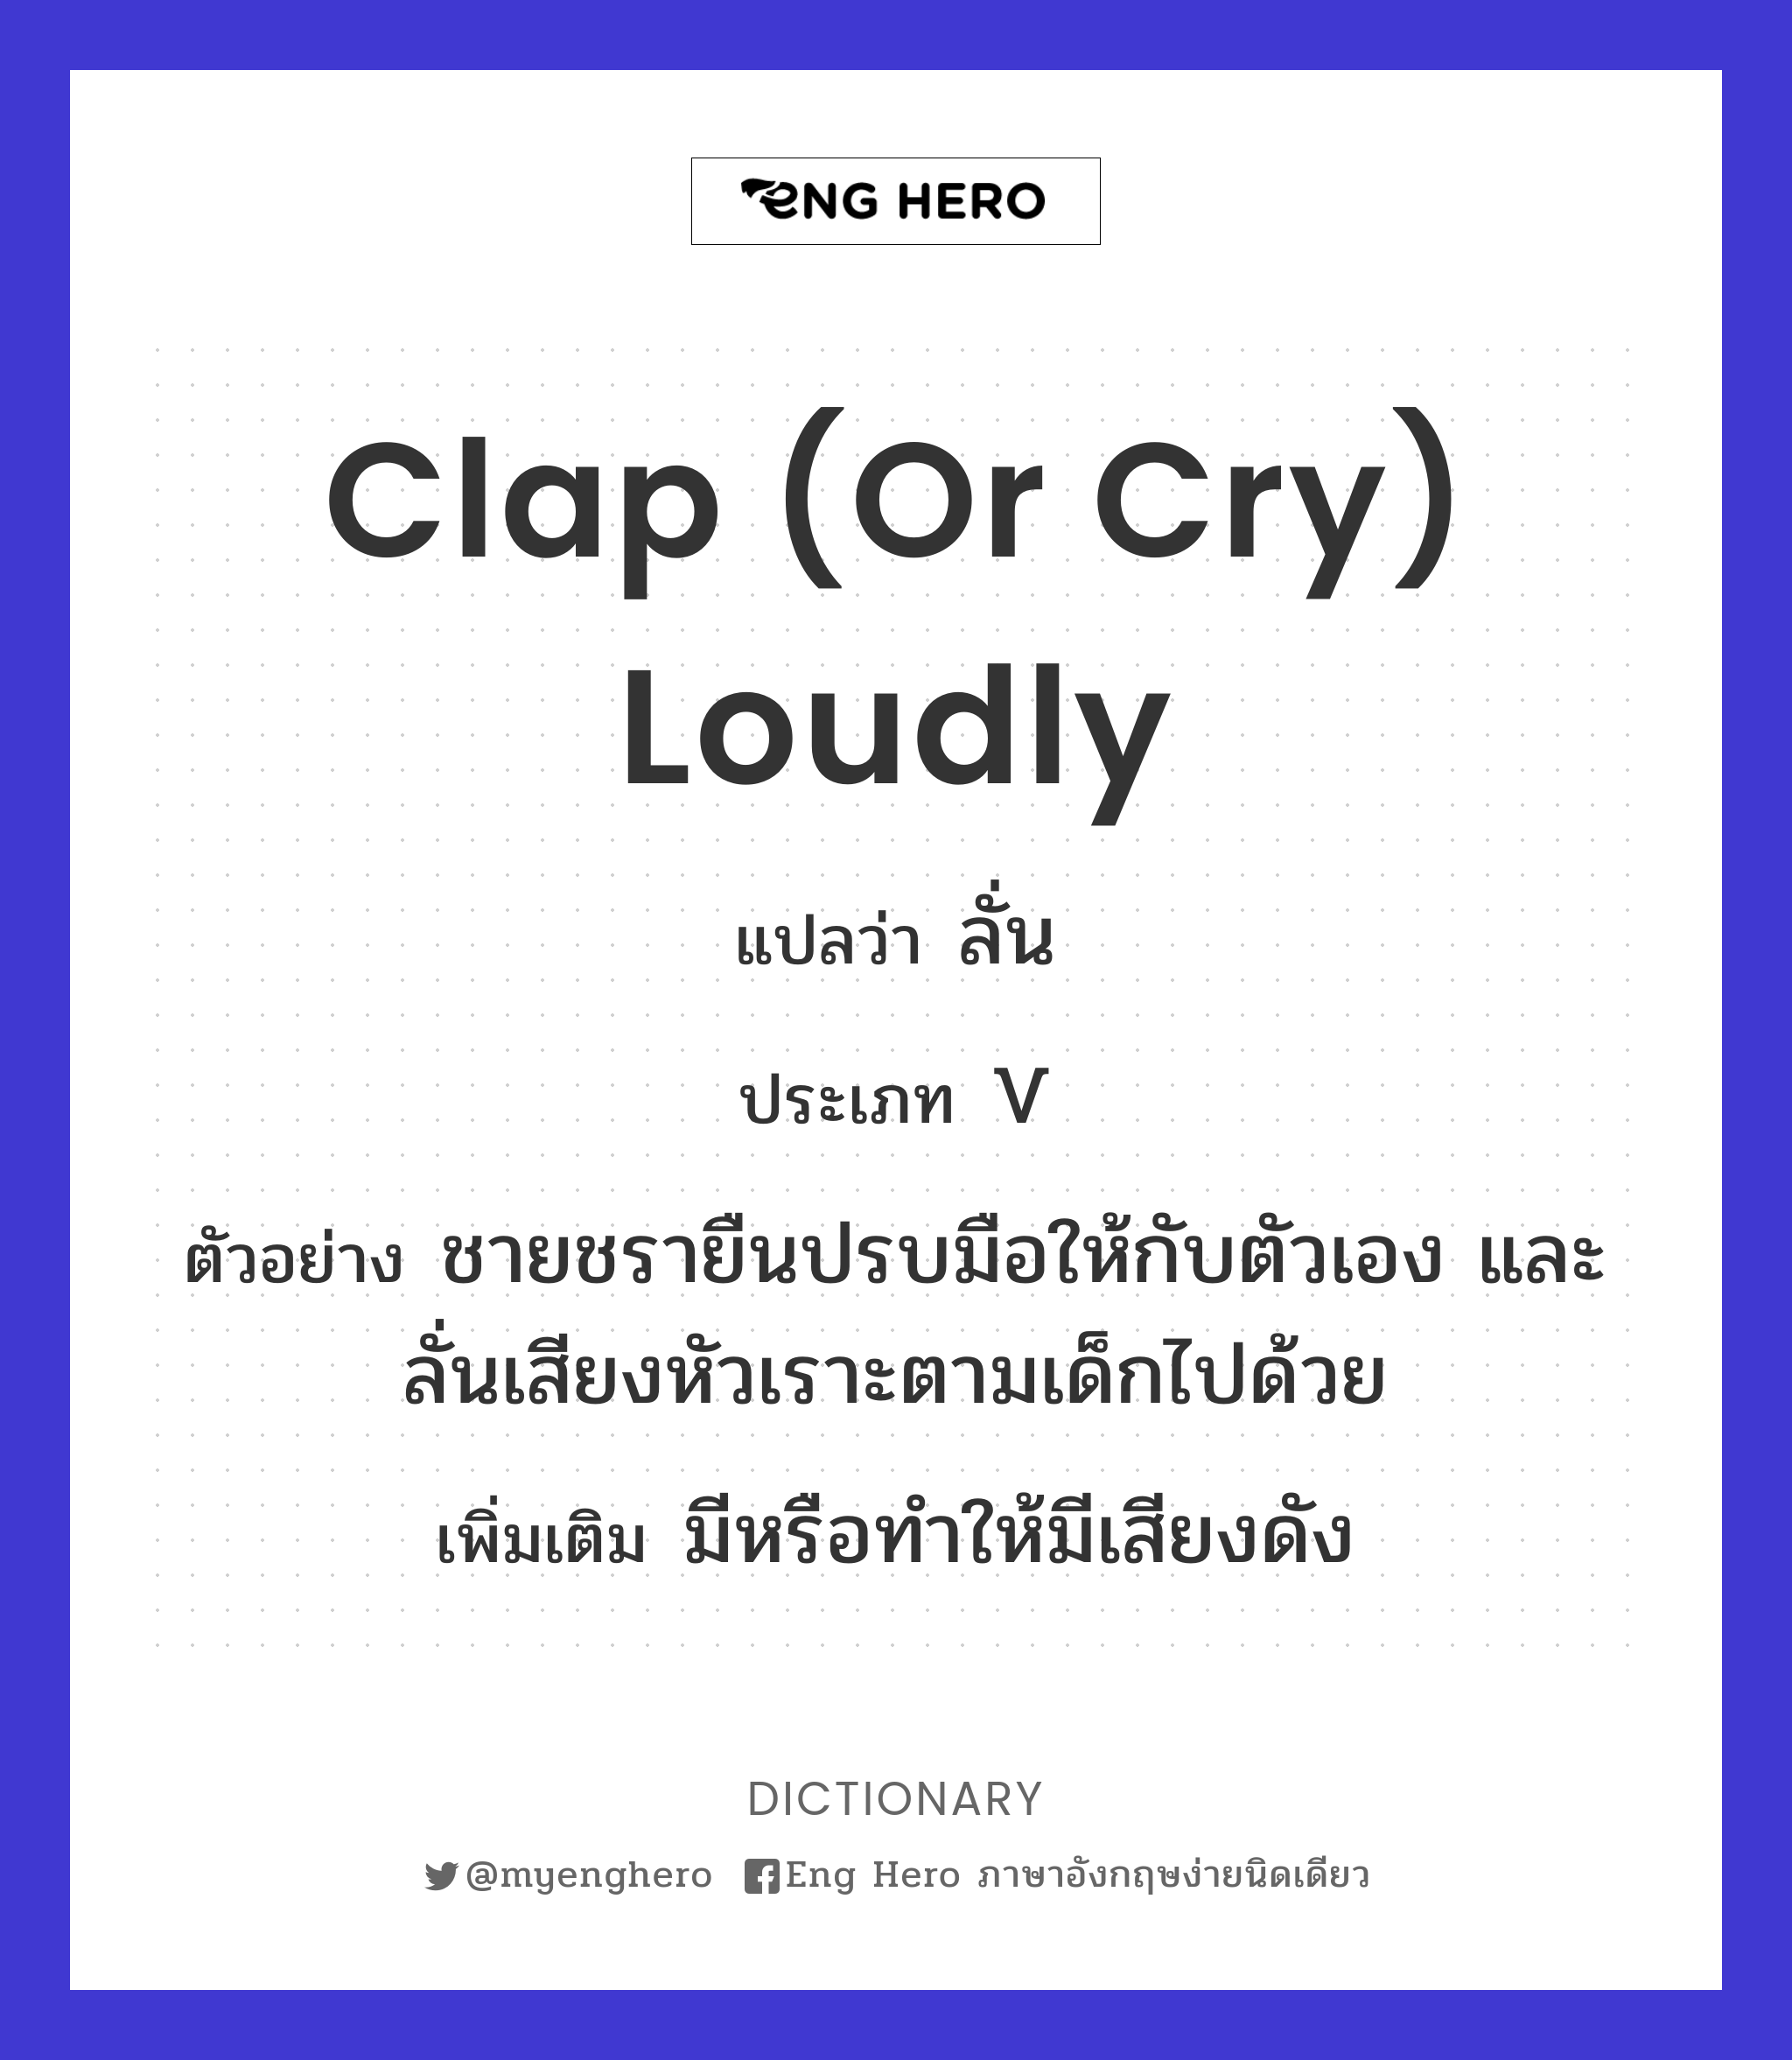 clap (or cry) loudly